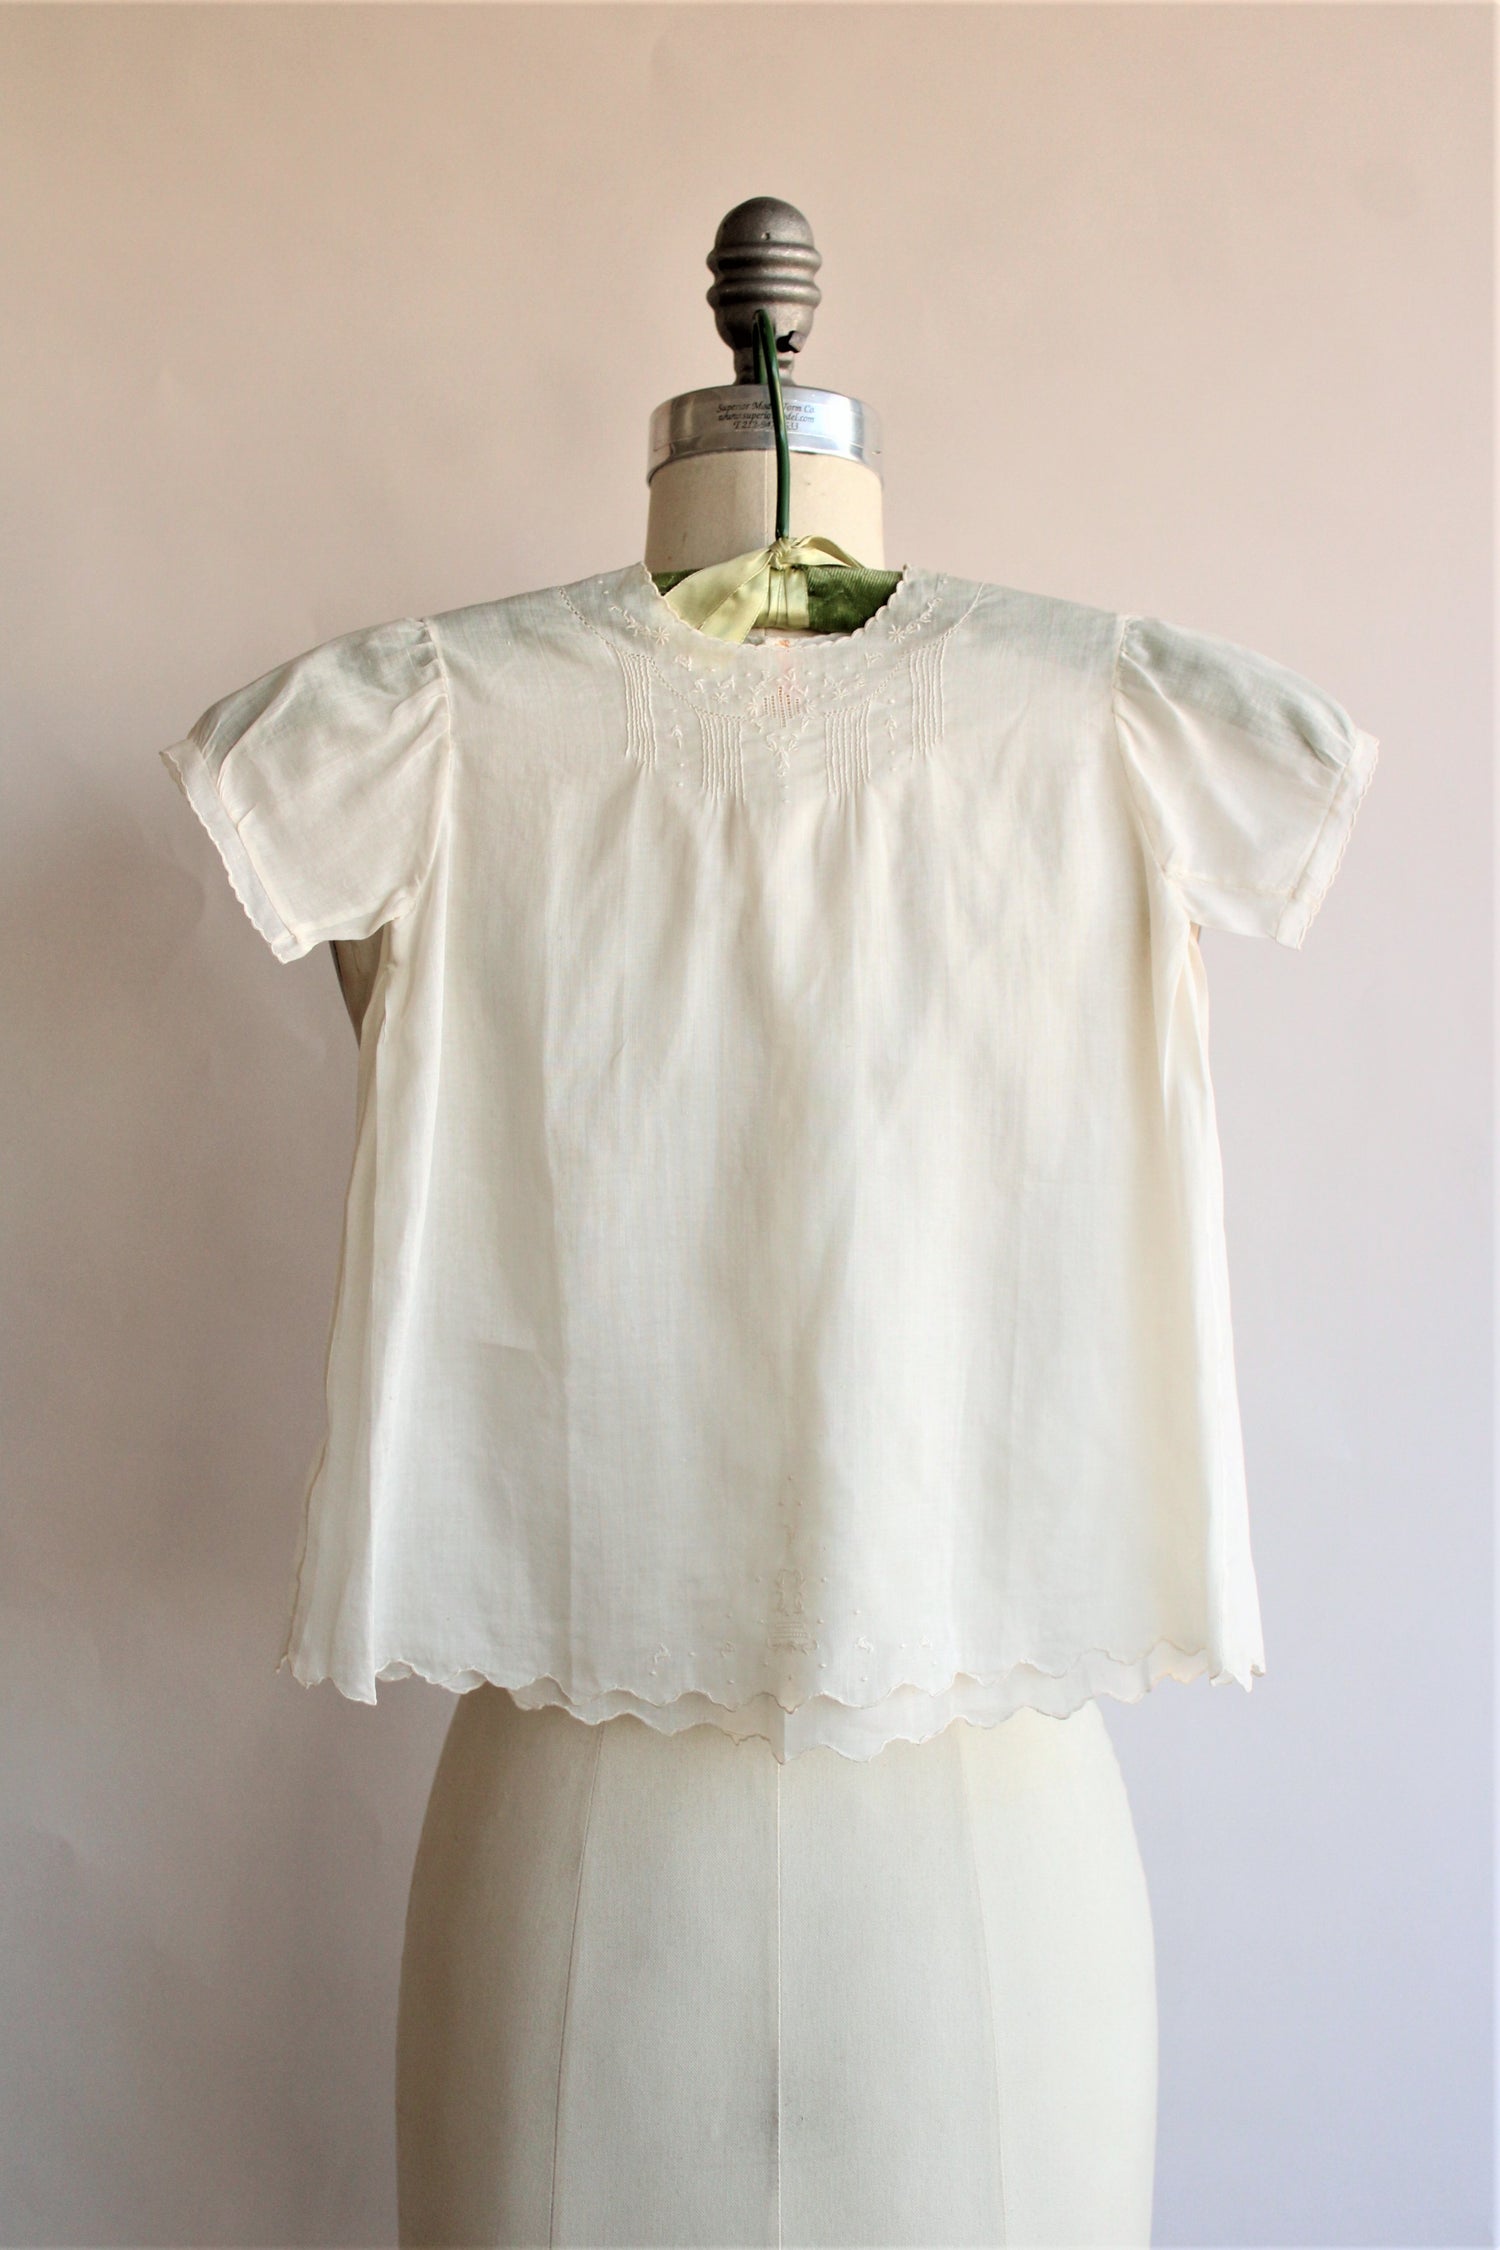 Vintage Hand Made Embroidered Baby Dress